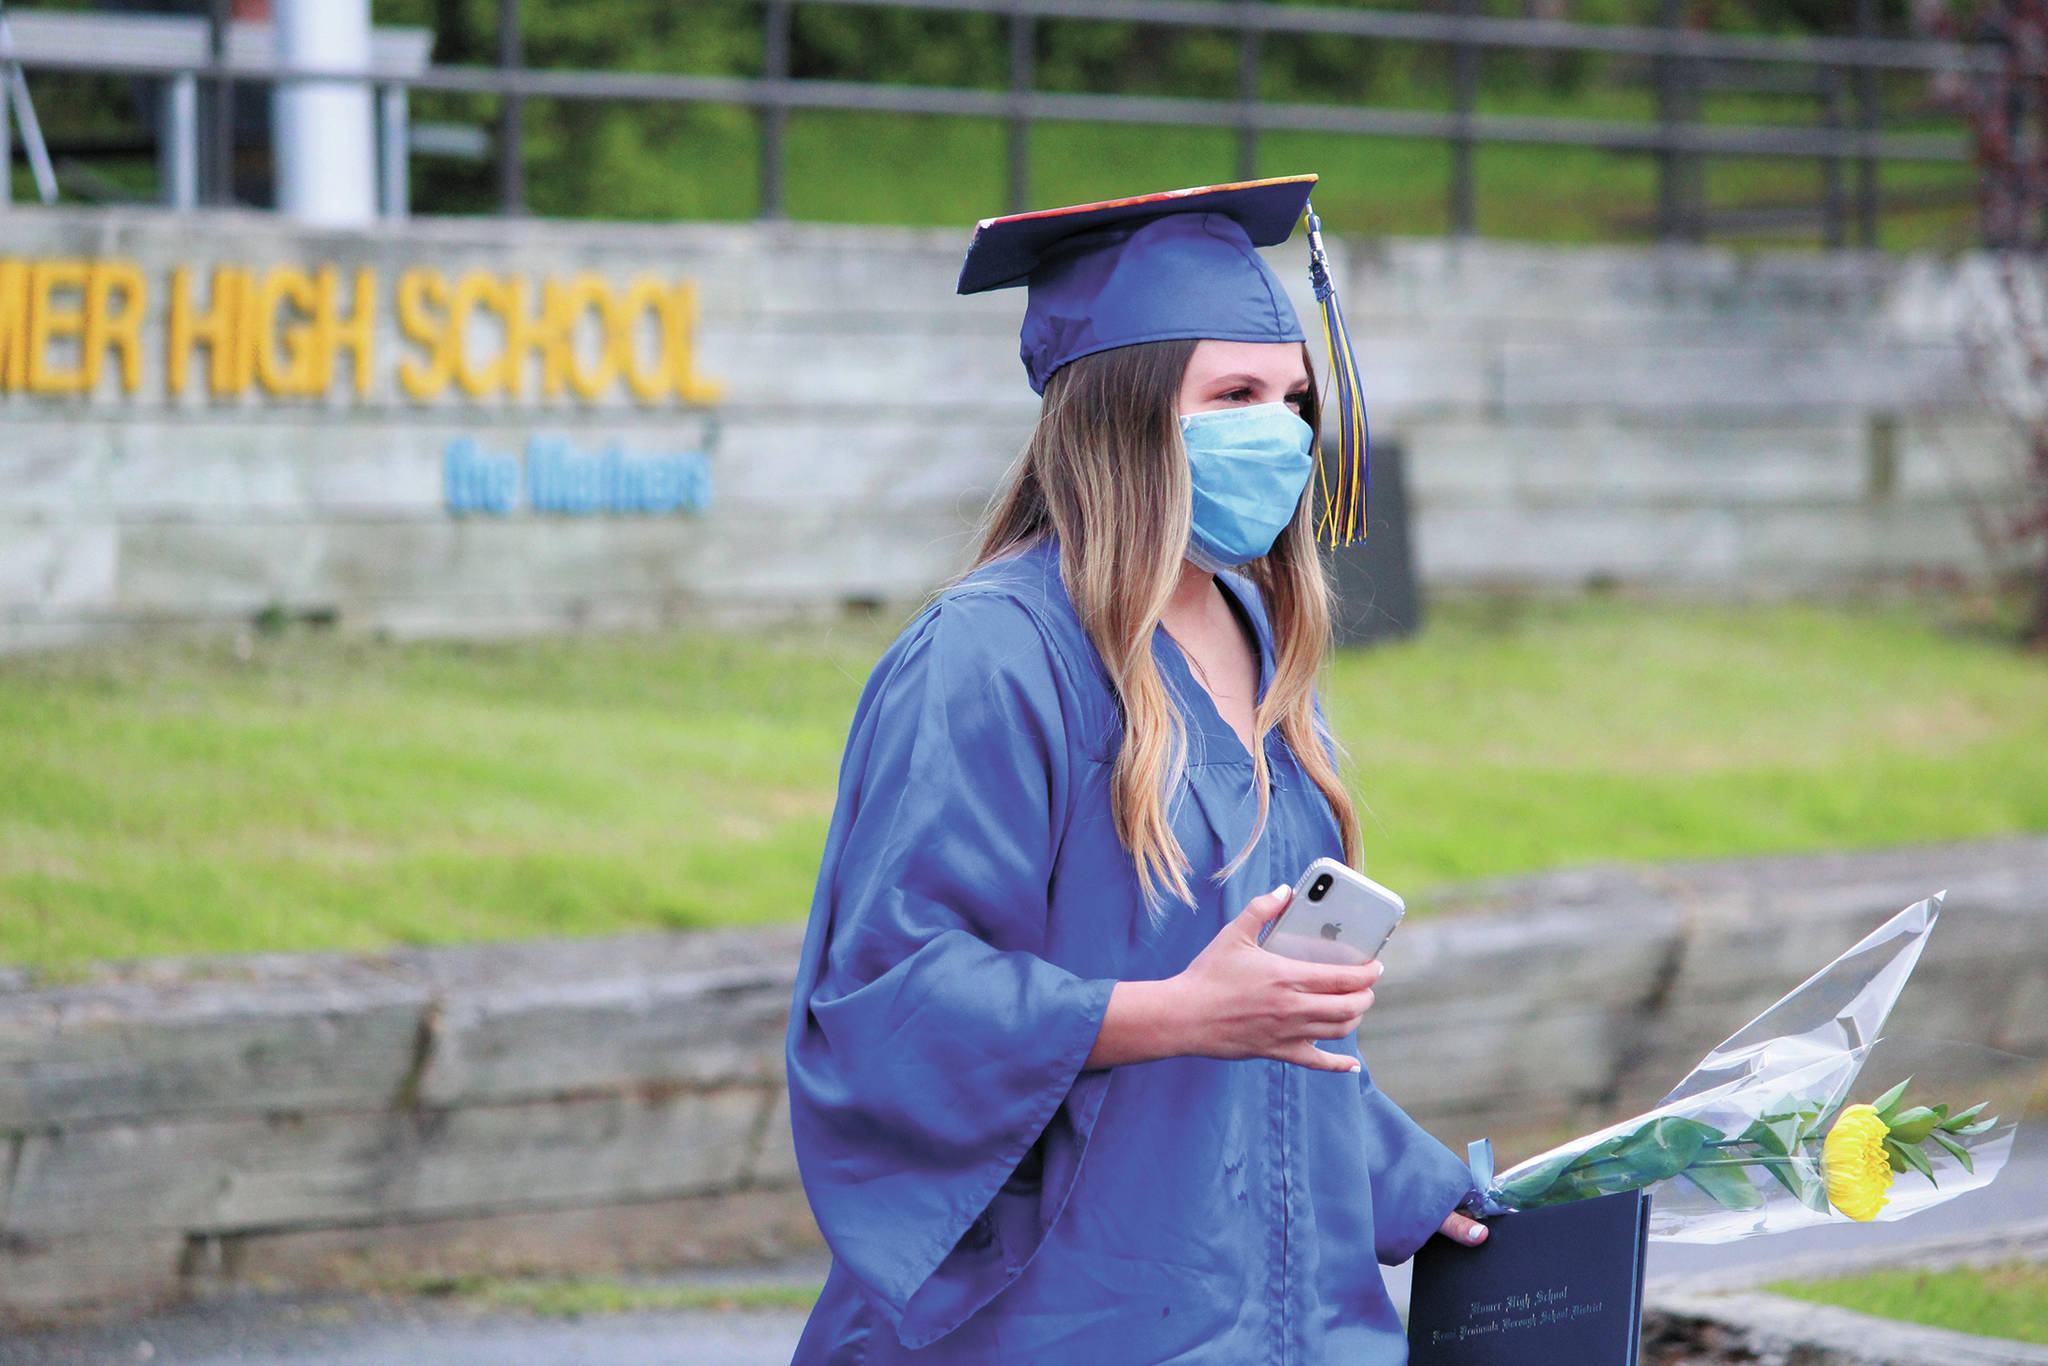 Graduate Rylee Doughty walks back to her family and their vehicle after getting her diploma during Homer High School’s drive-through commencement ceremony Monday, May 18, 2020 at the school in Homer, Alaska. (Photo by Megan Pacer/Homer News)